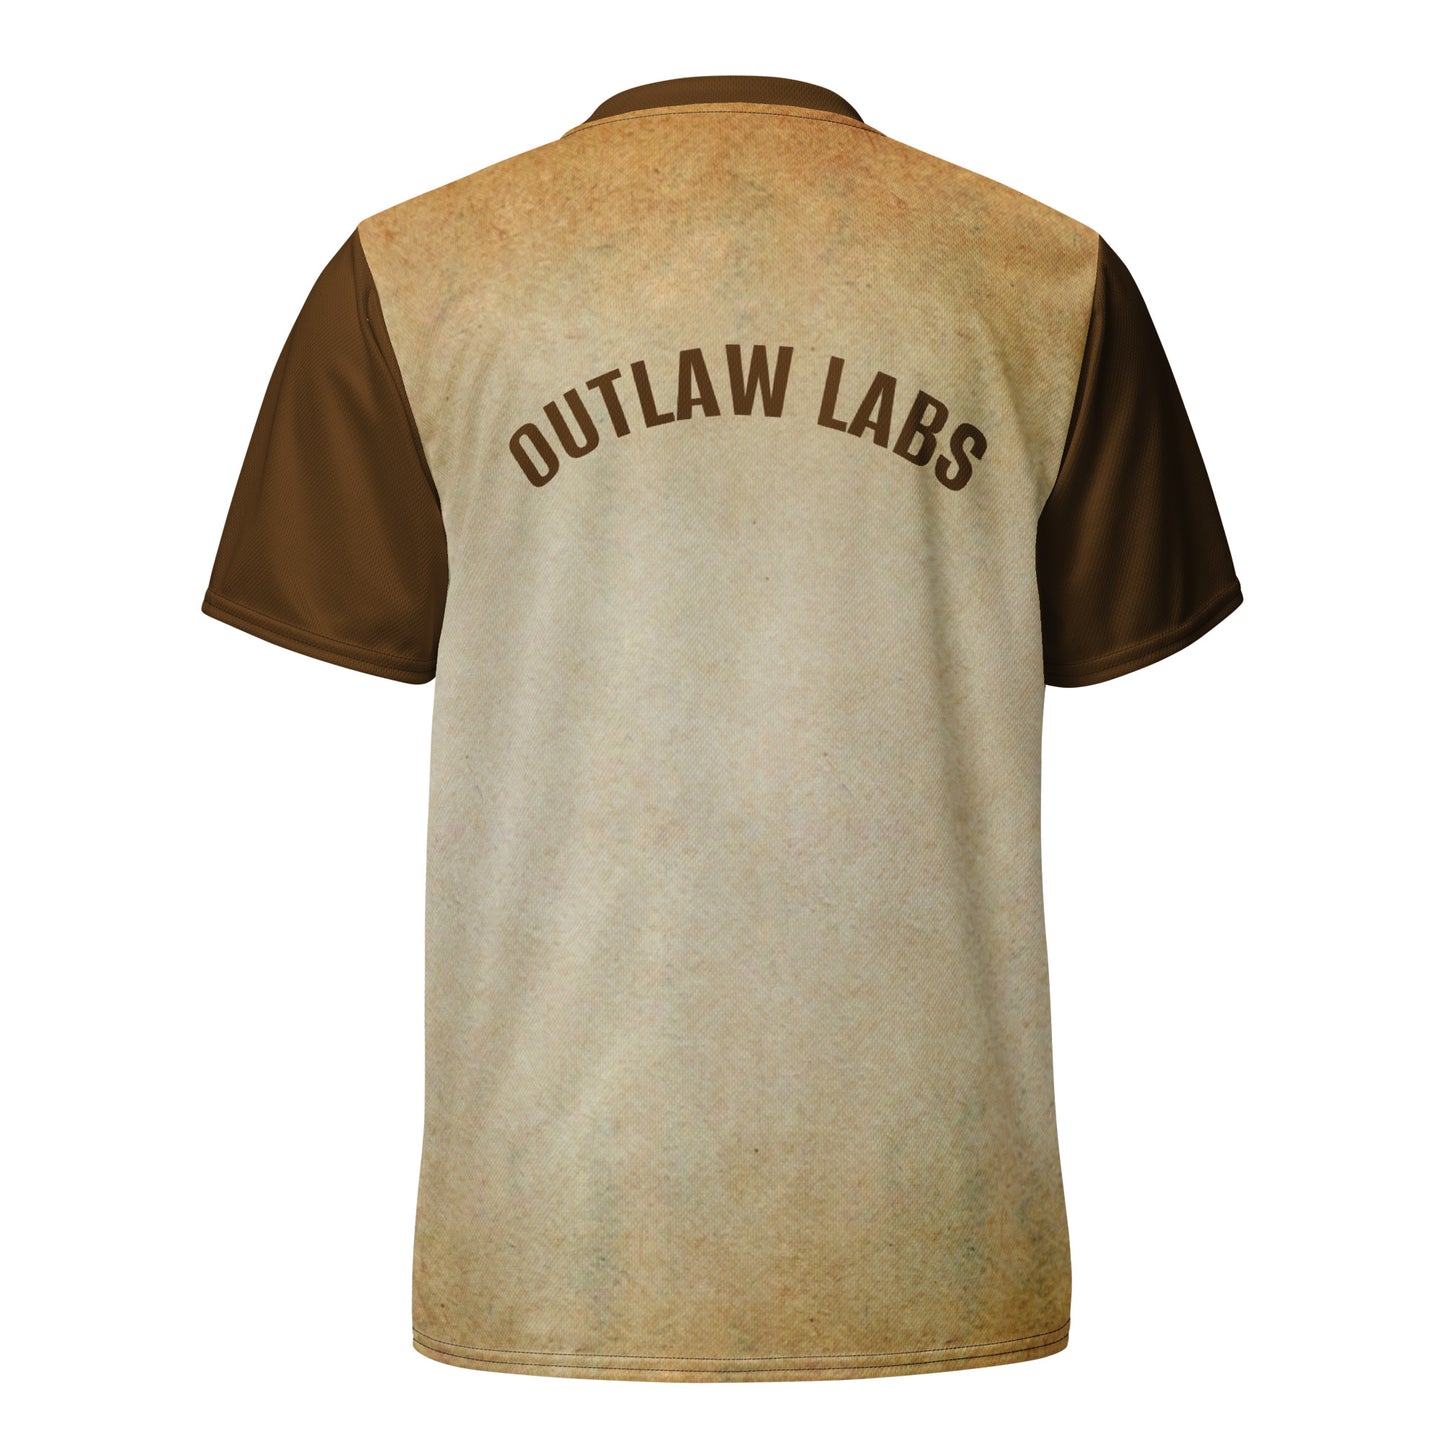 OUTLAW LABS Recycled unisex sports jersey